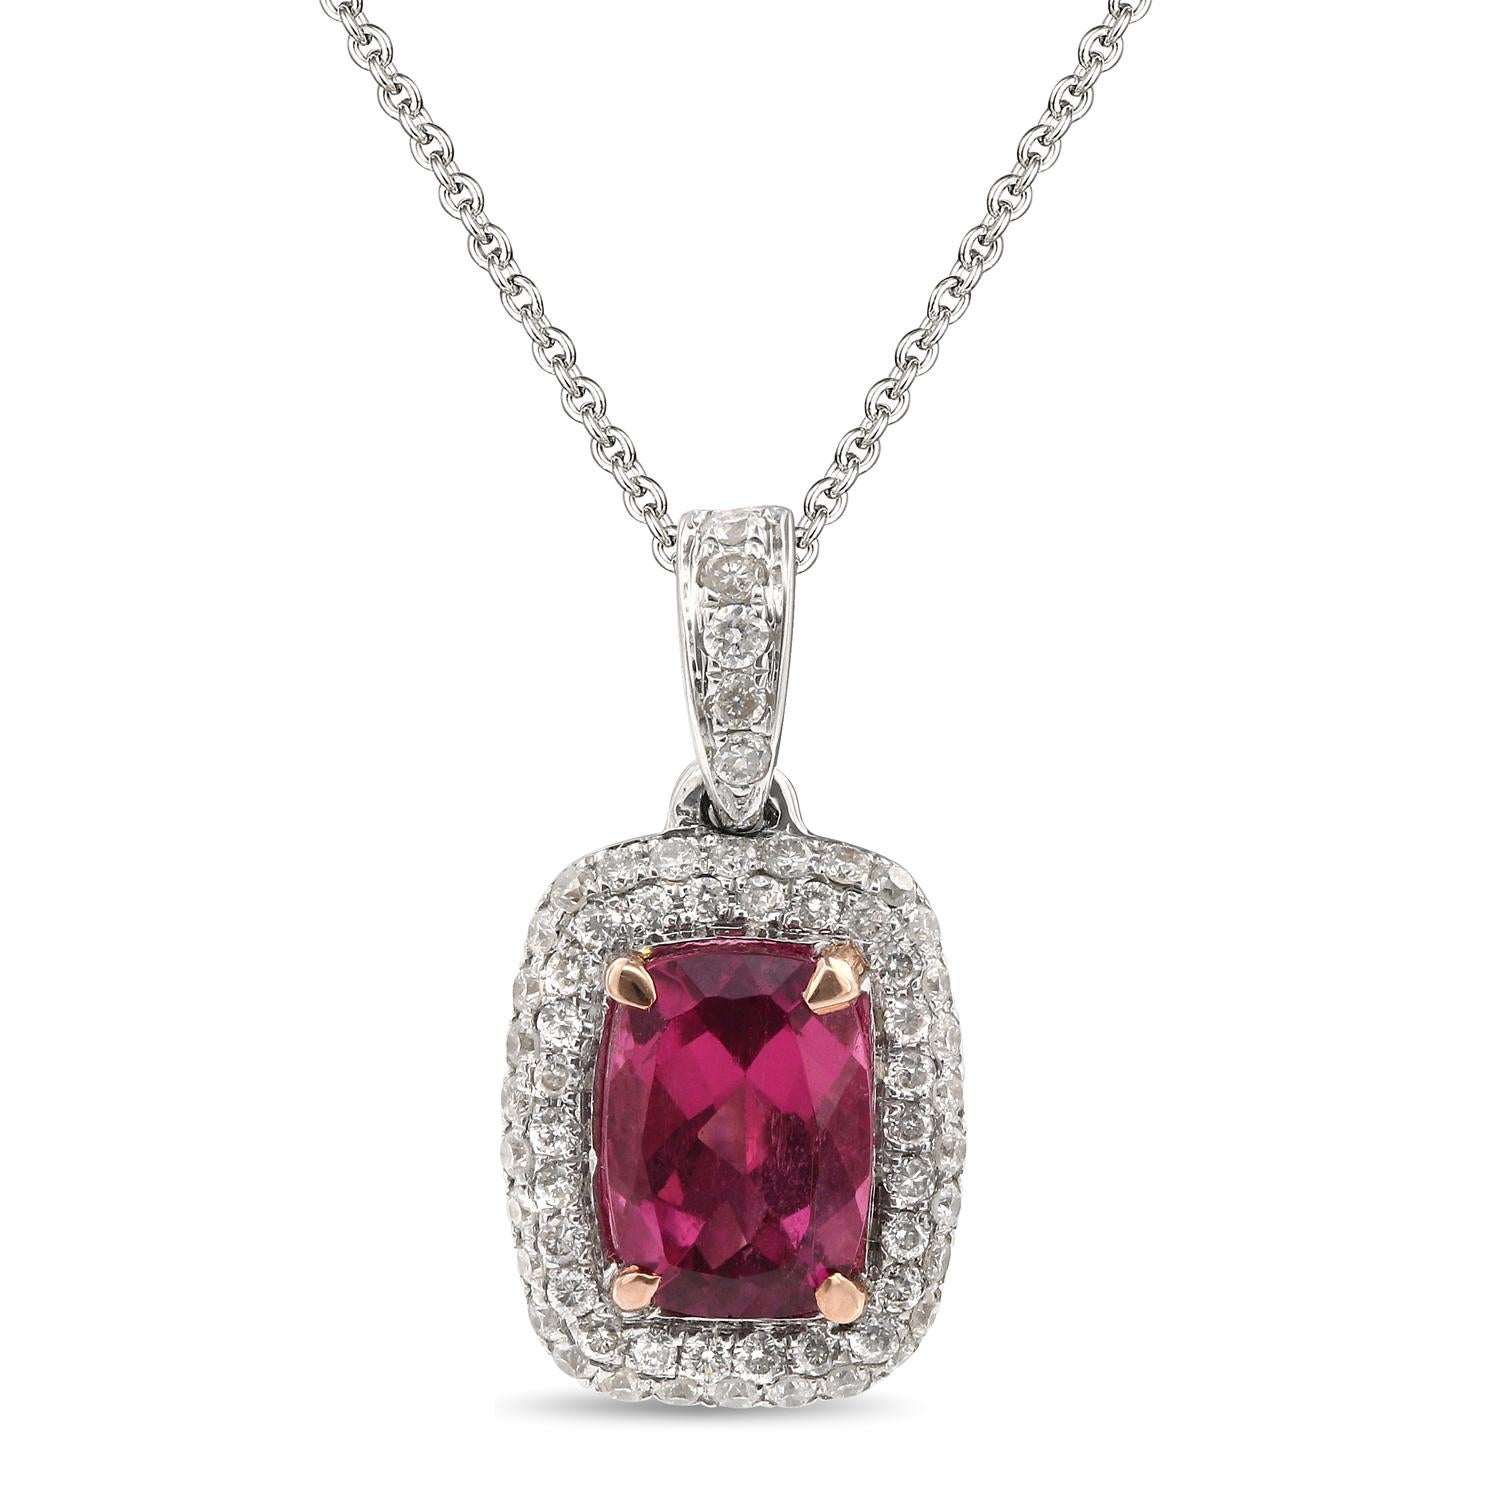 Contemporary 14 Karat White gold, Rubellite, and Diamond Pendant.

Diamonds of approximately 0.25 carats, Rubellite of approximately 0.79 carats mounted on 14 karat white gold pendant. The pendant weighs approximately 1.57 grams.

Please note: The